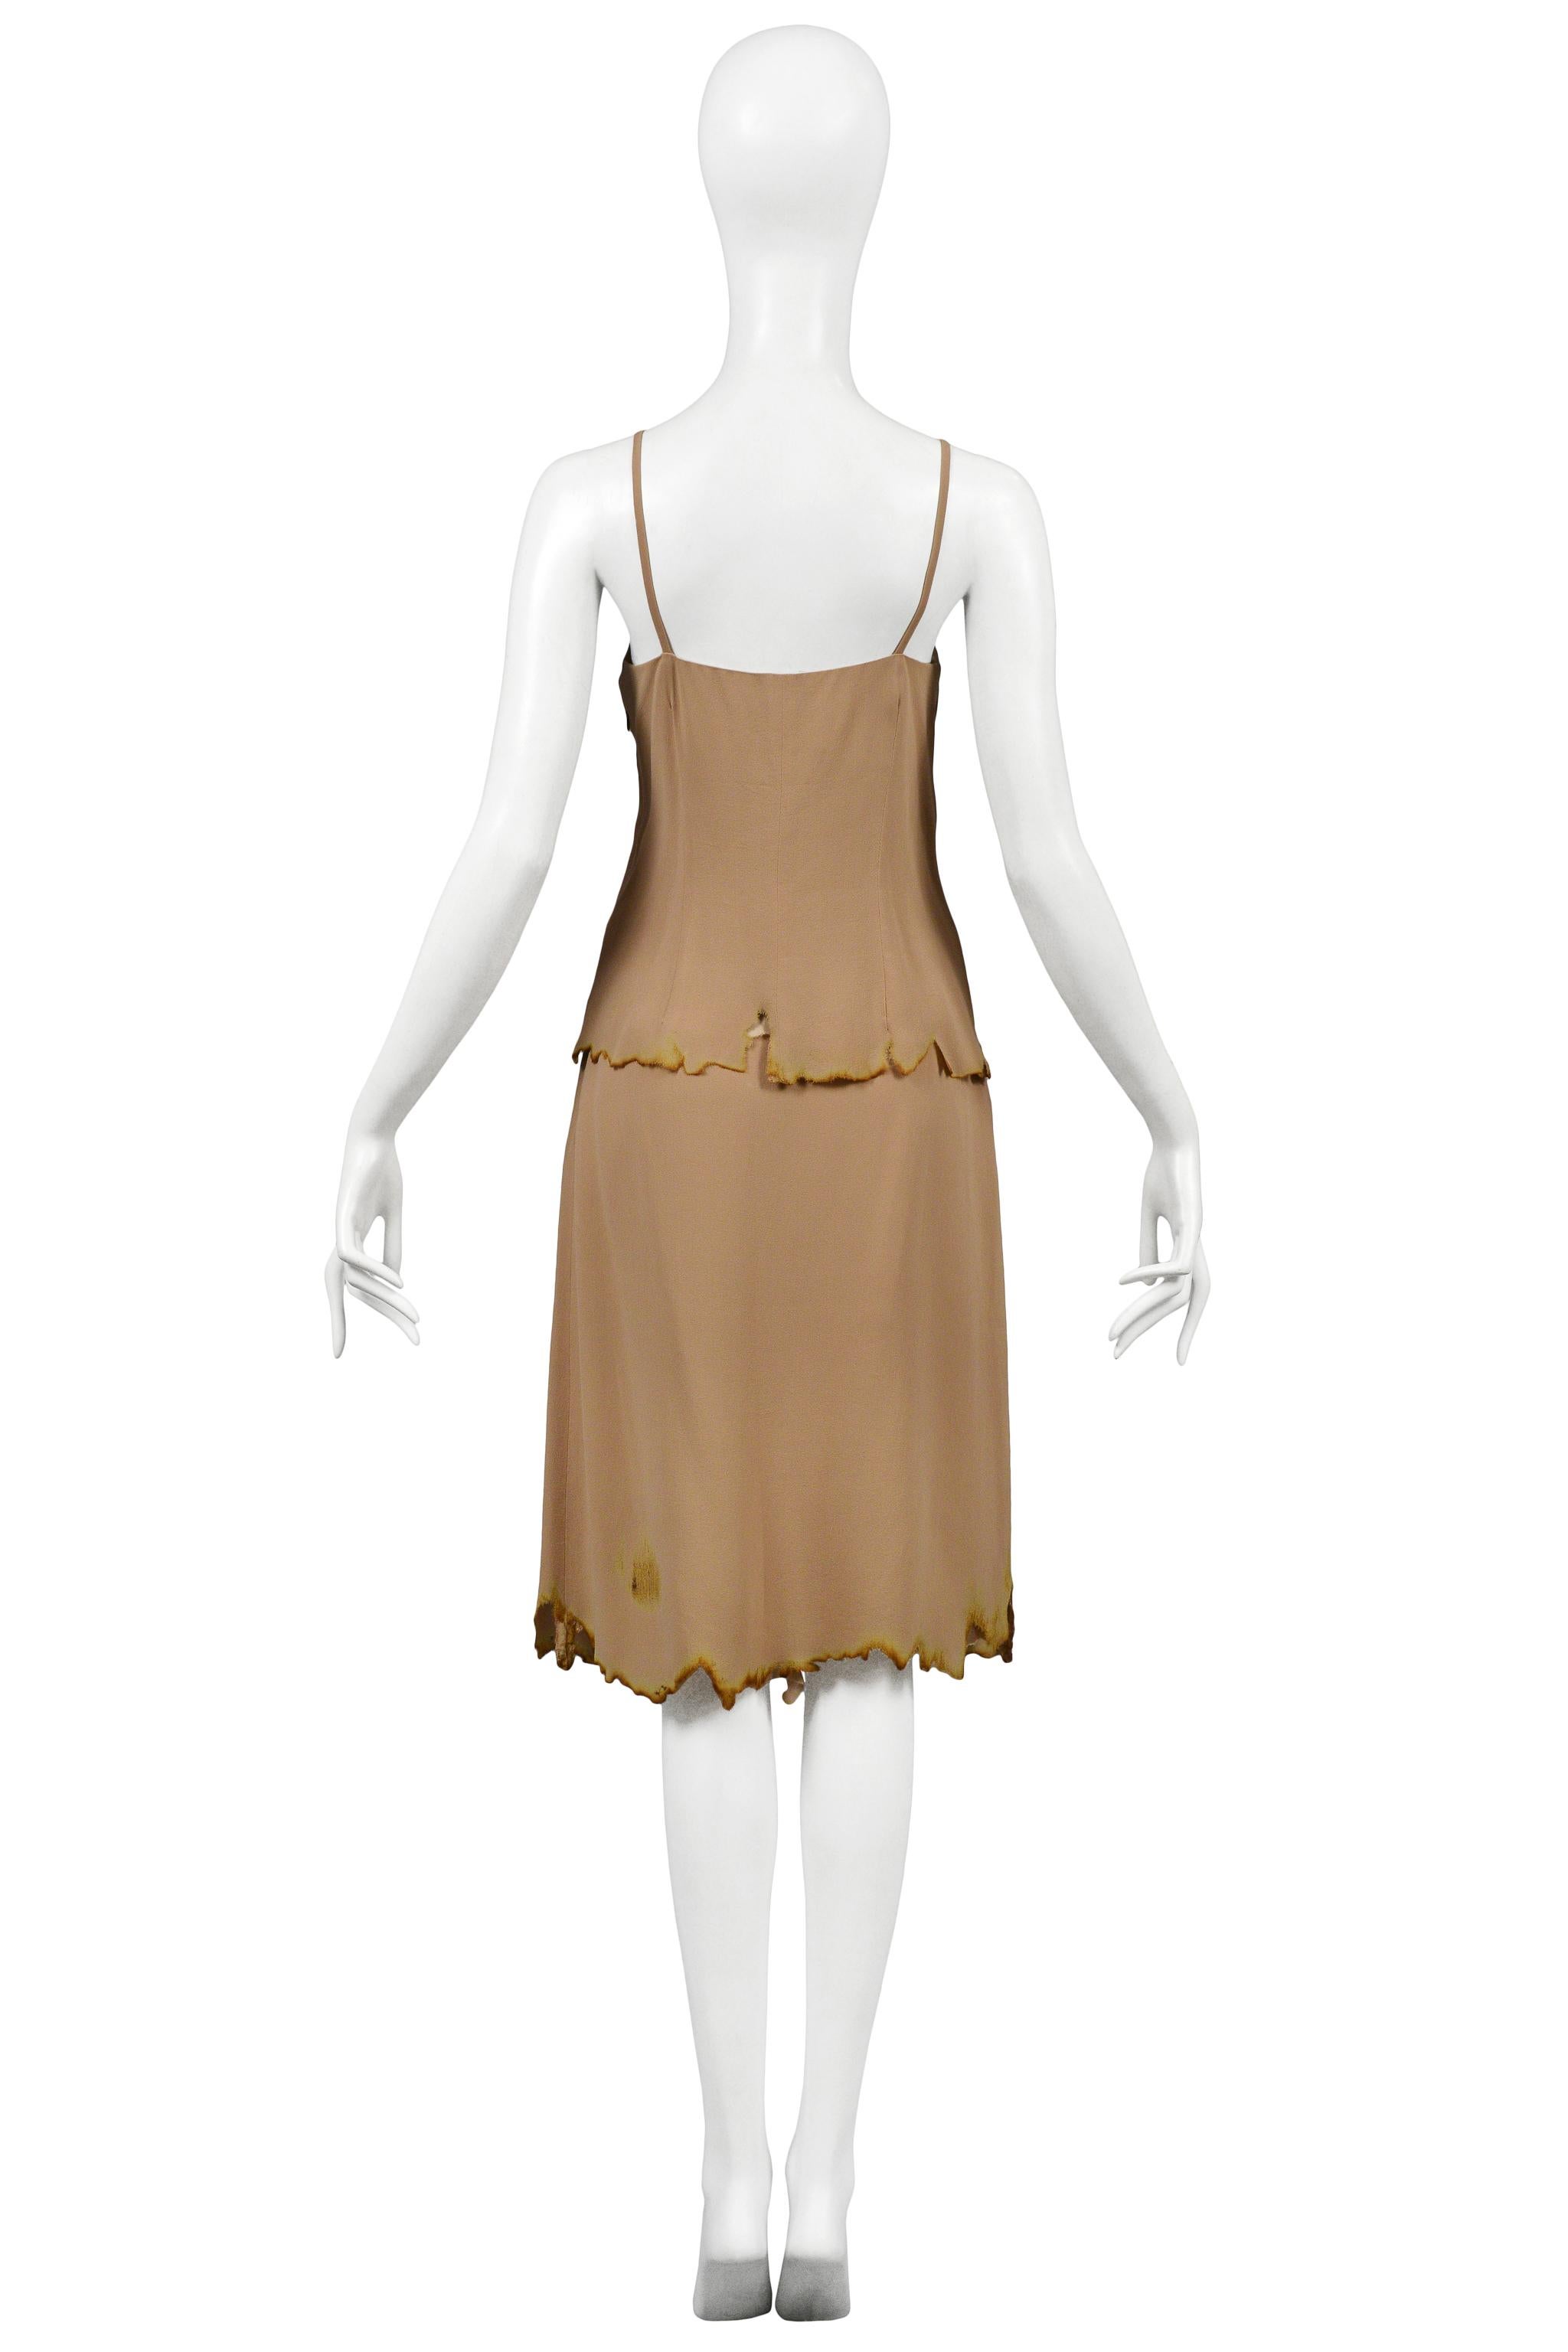 Brown Maison Martin Margiela Nude Burnt Edged Top and Skirt Ensemble 2003 For Sale